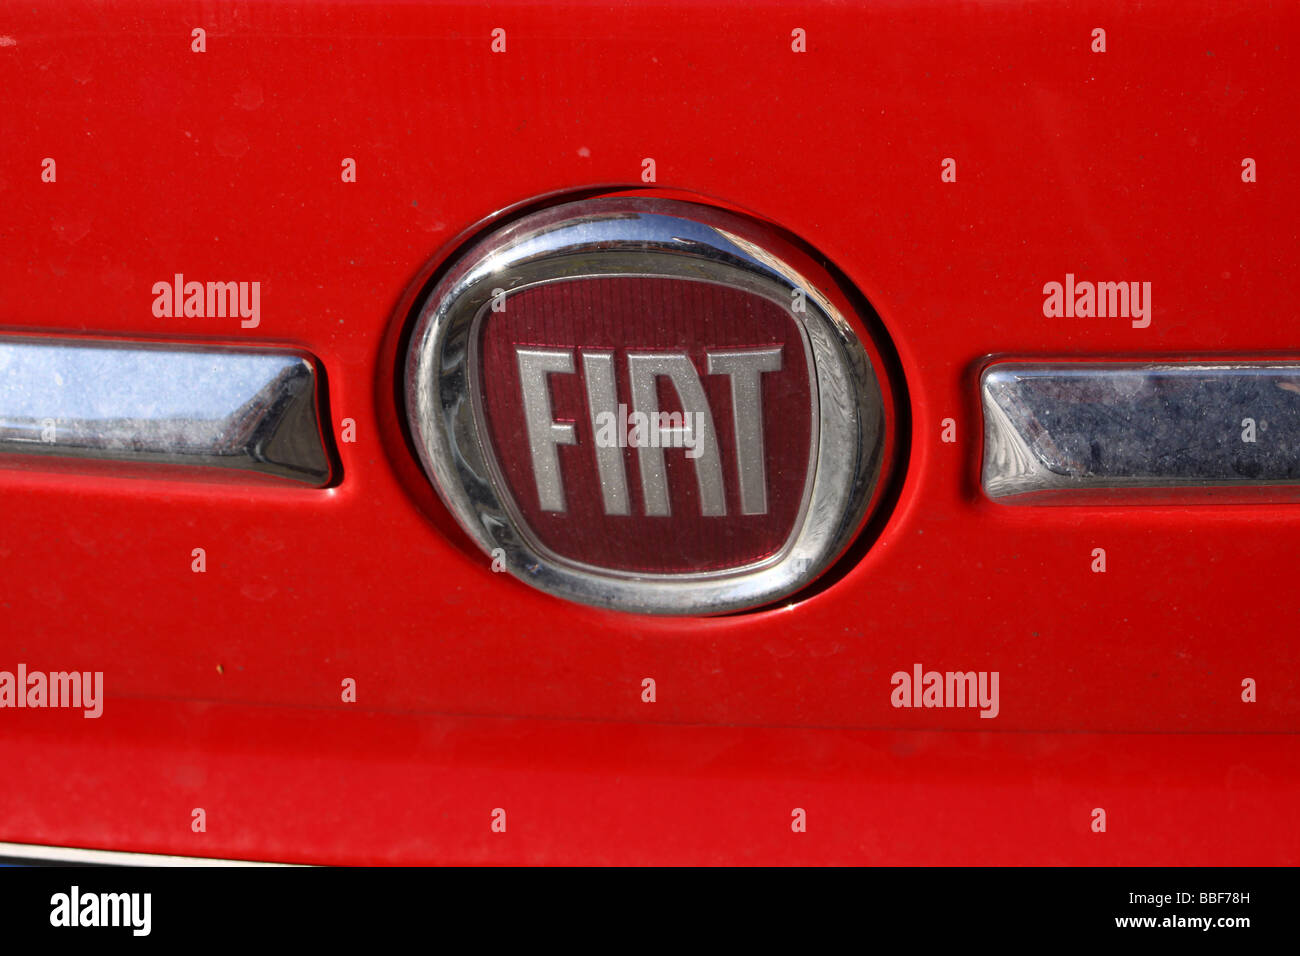 Fiat logo on a red Fiat 500 Stock Photo